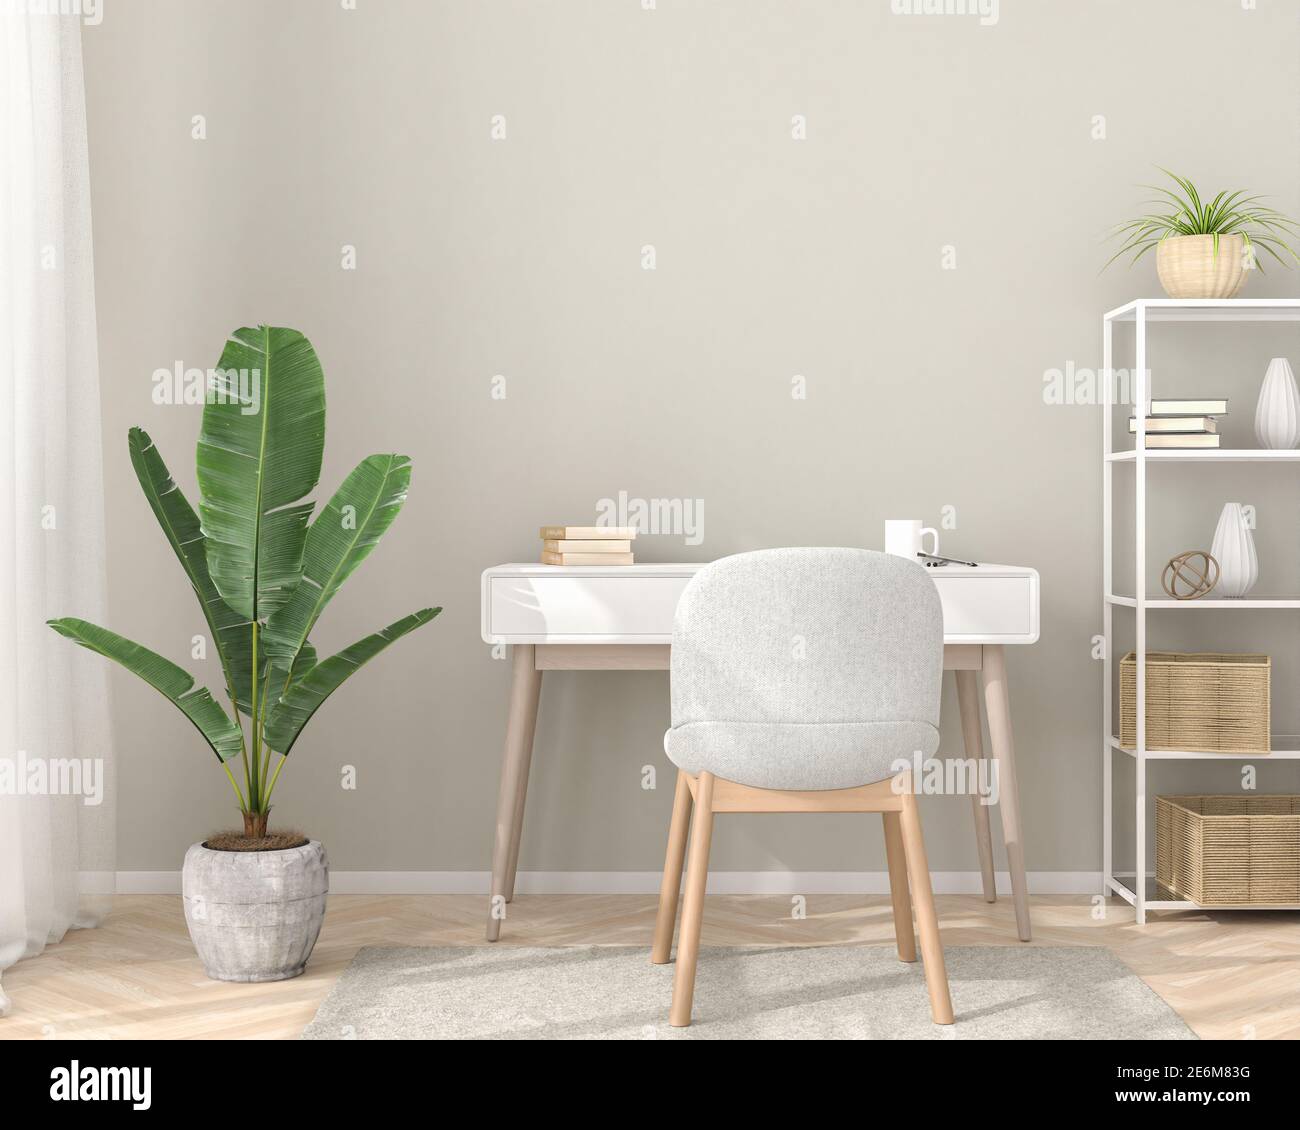 Interior mockup with a desk, chair, shelf, carpet, curtain. Copy space for picture on the wall. 3d render Stock Photo